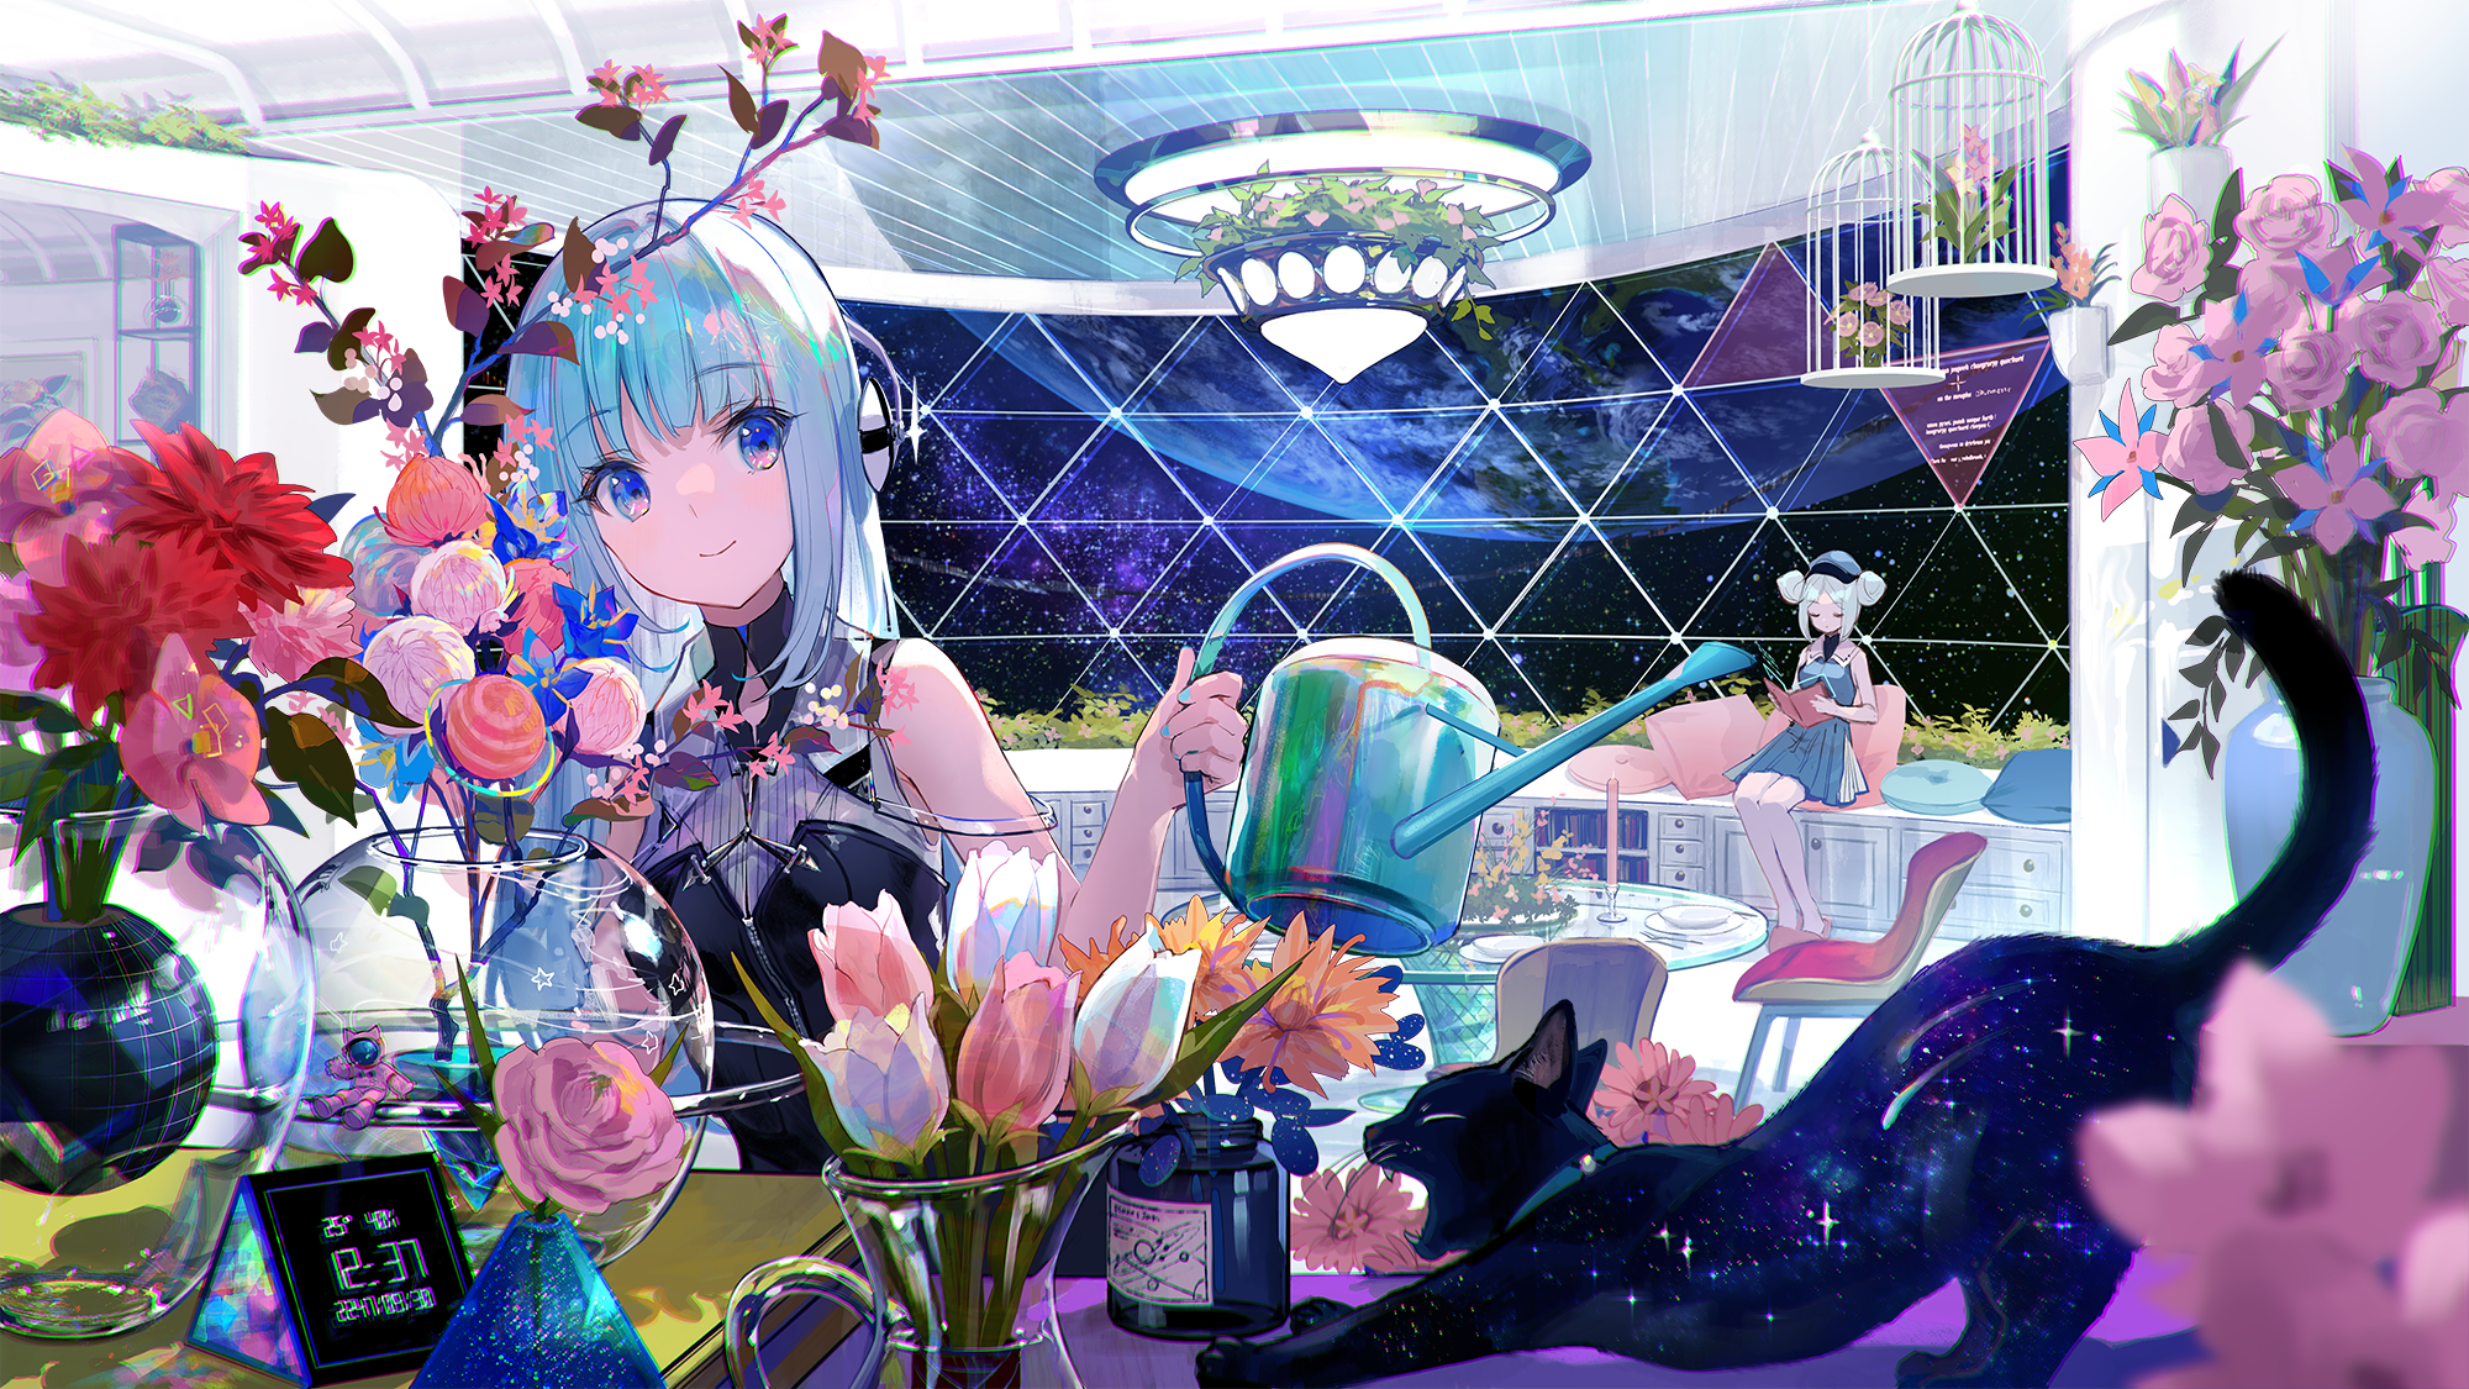 Anime Pixiv Anime Girls Smiling Long Hair Space Planet Stars Cats Animals Flowers Vases Cages Blue H 2469x1389